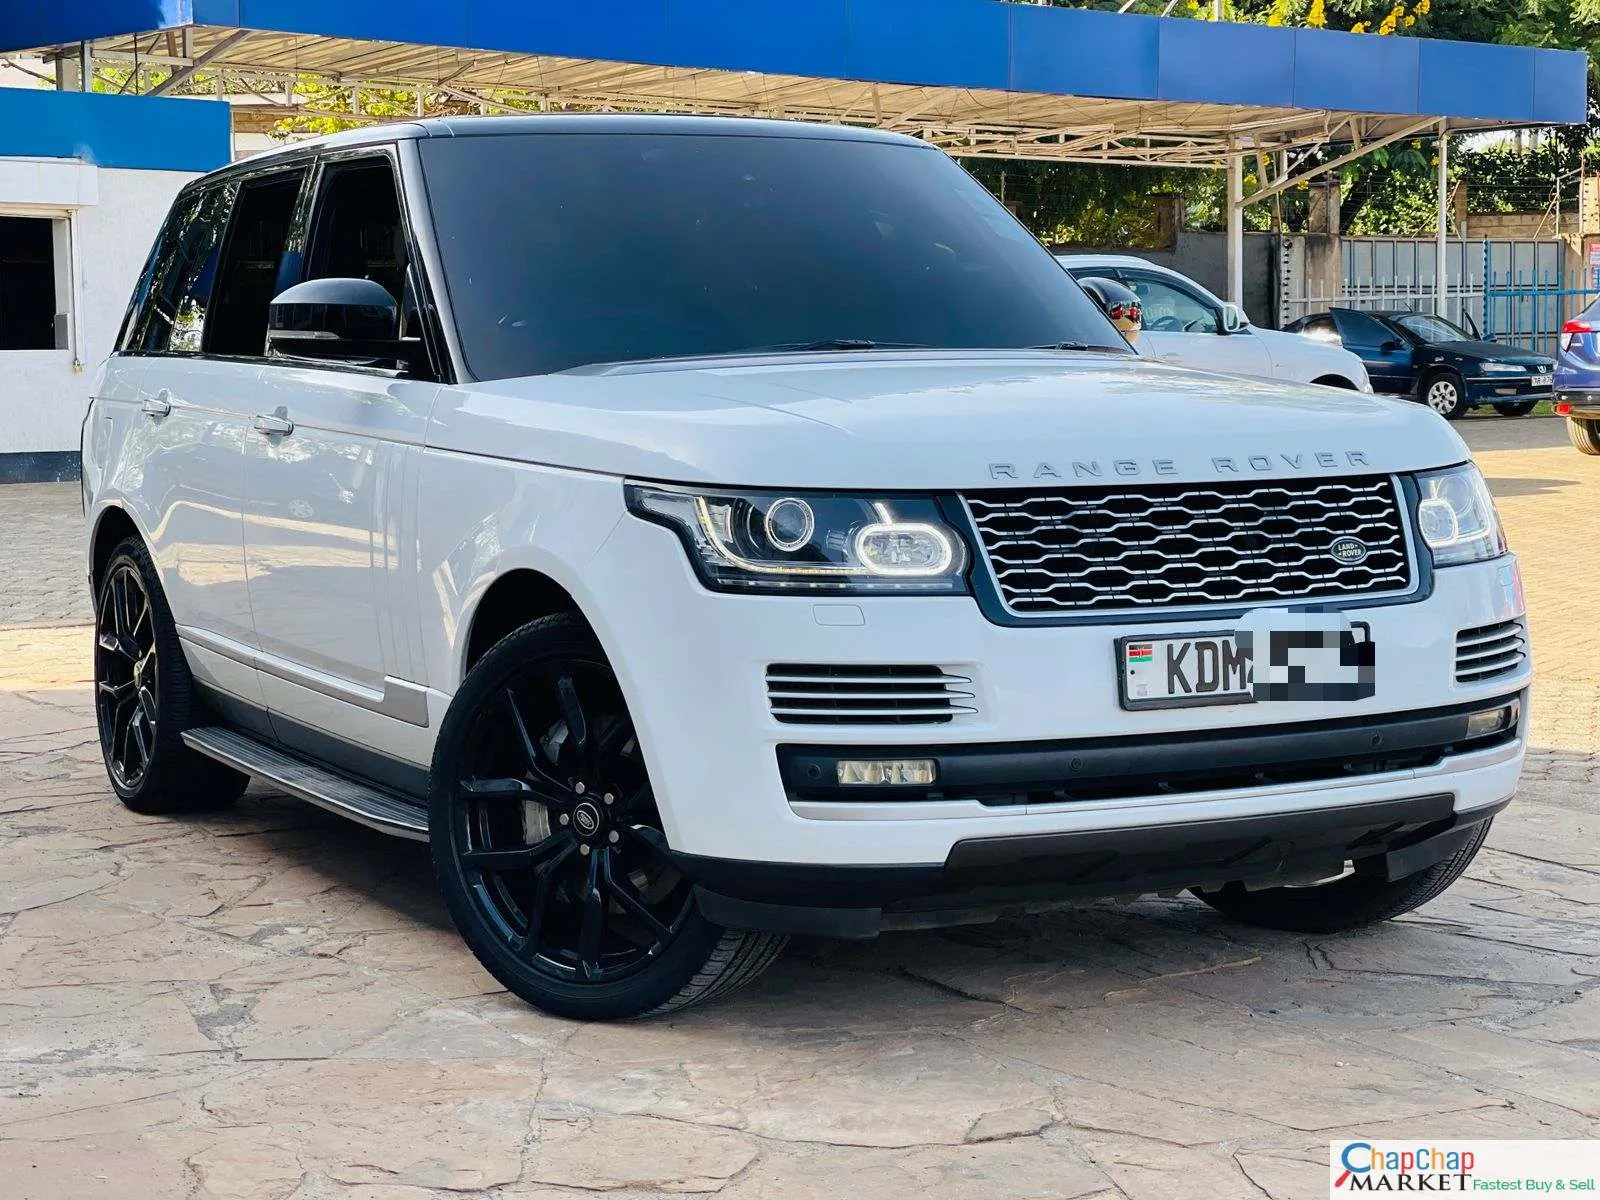 RANGE ROVER VOGUE SDV8 4.4 SUNROOF You Pay 40% DEPOSIT TRADE IN OK For sale in kenya exclusive Hire purchase installments SE